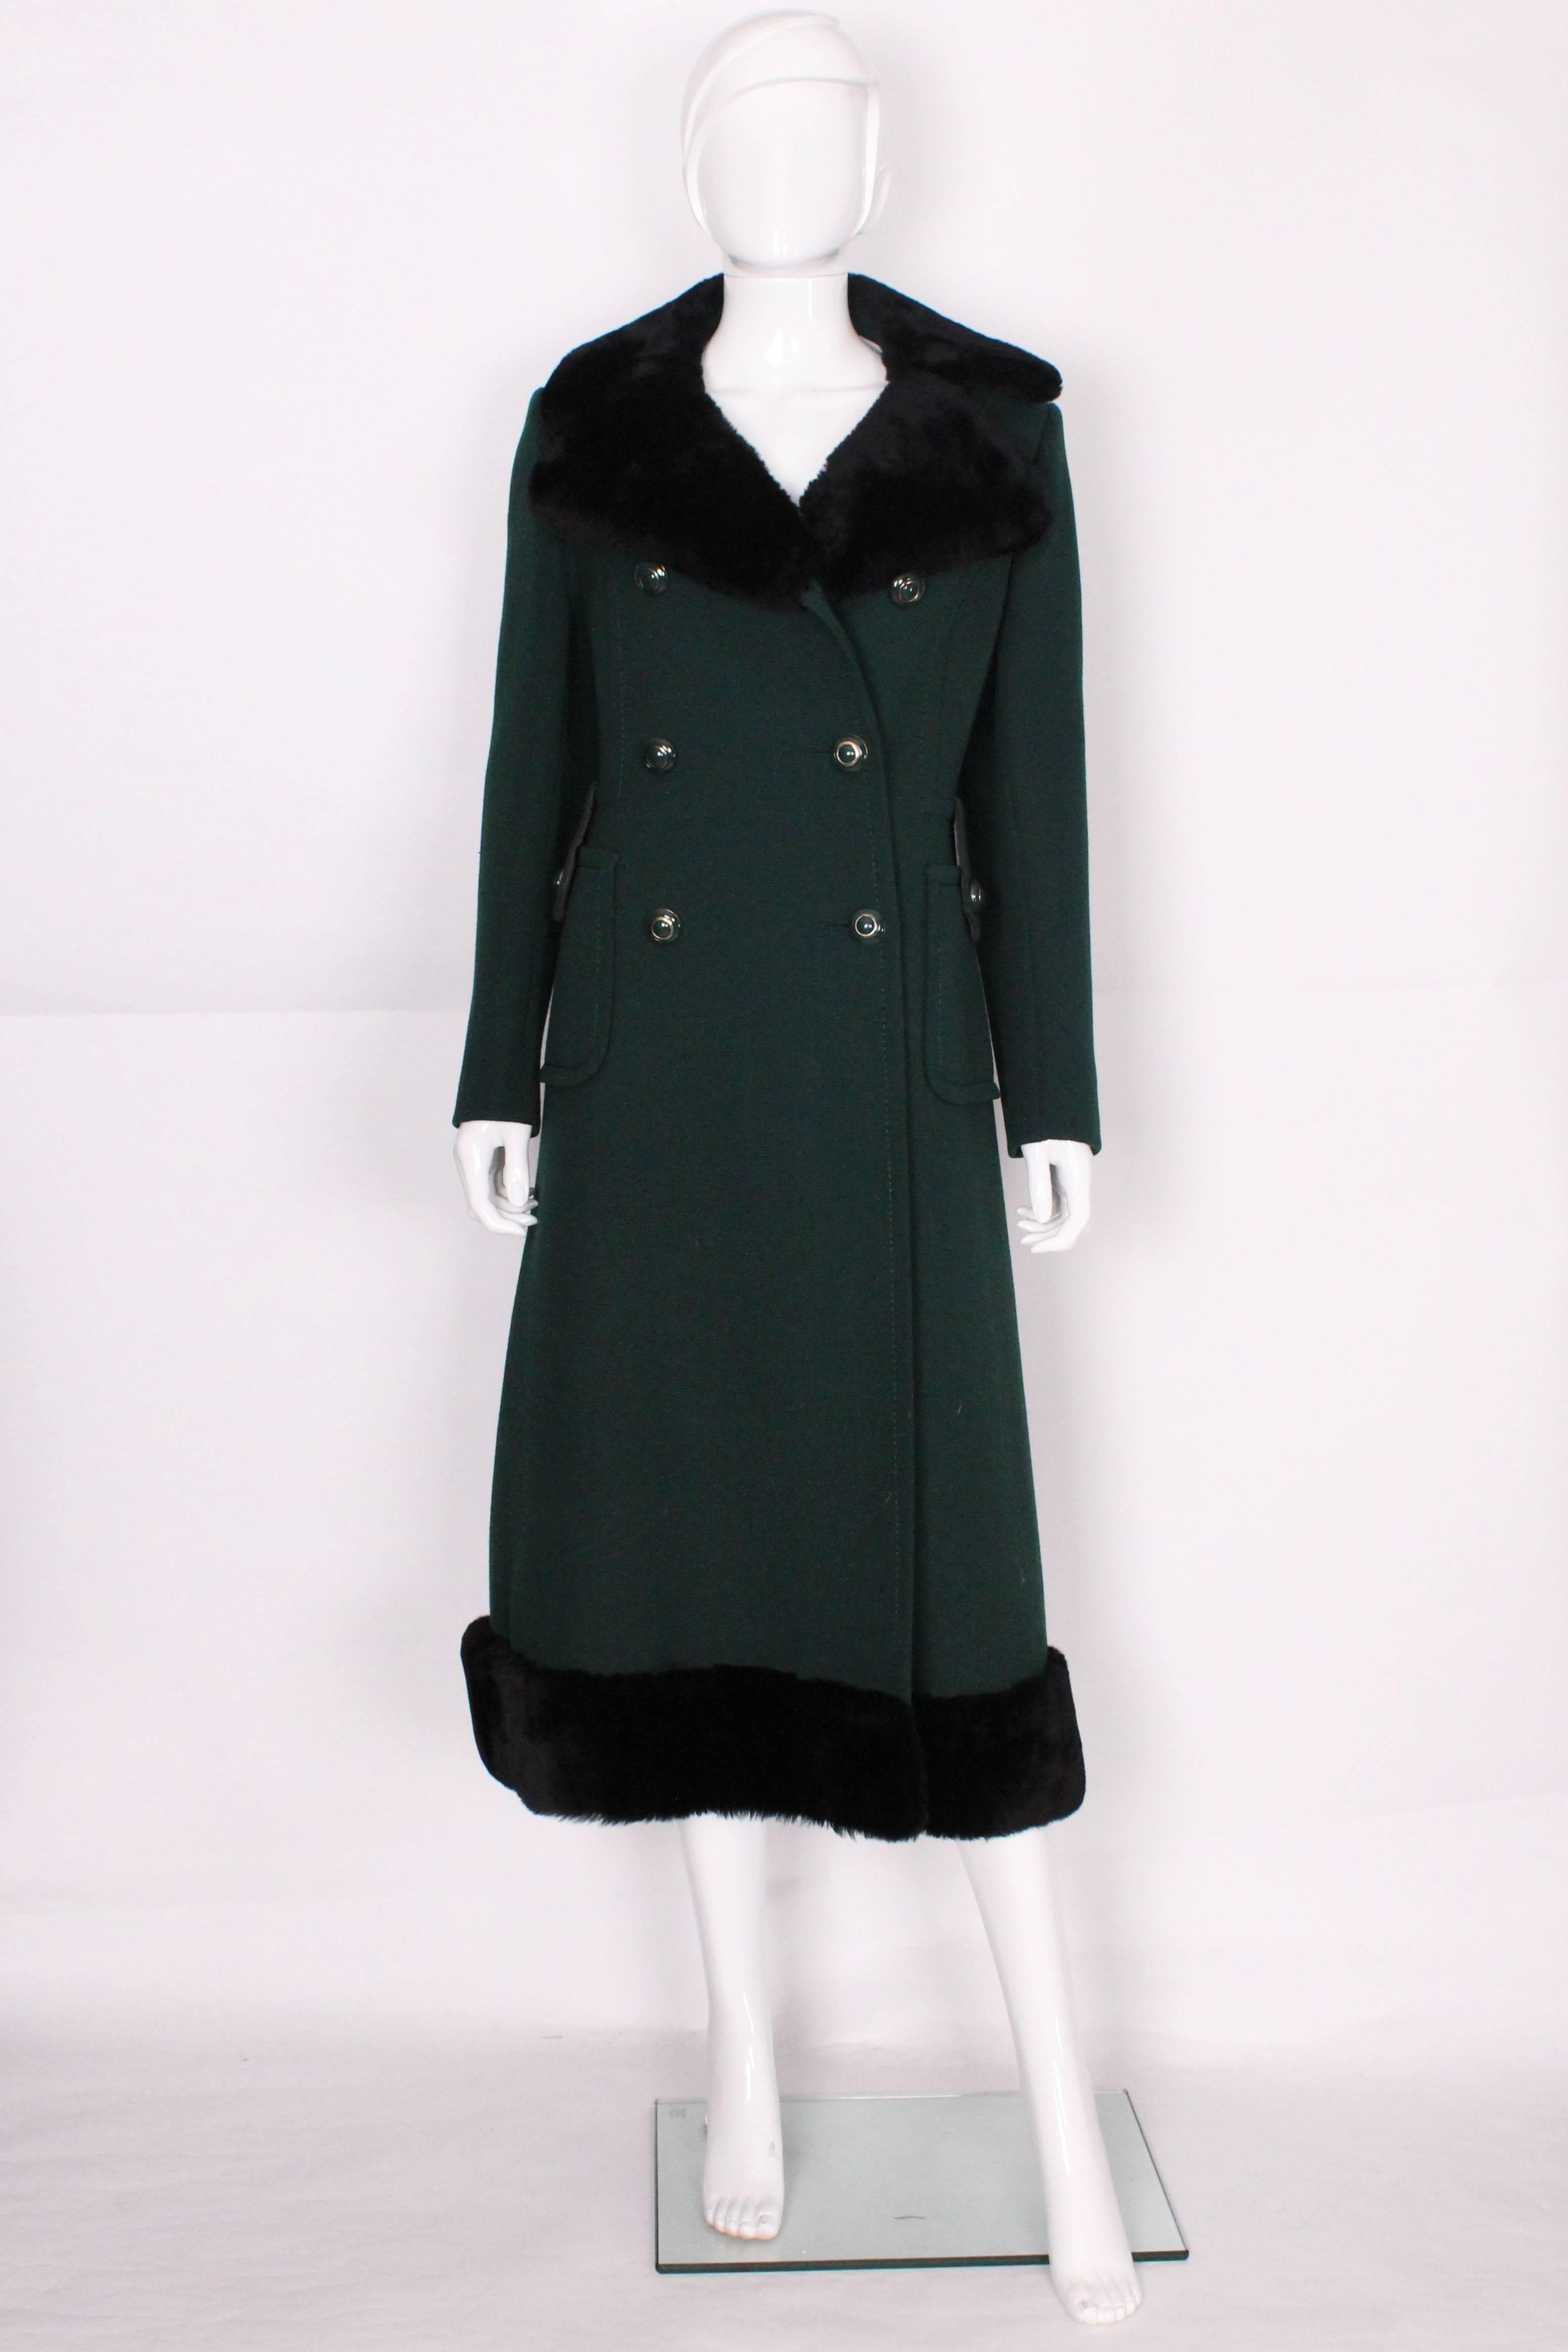 This chic coat is made of really high quality dark pine green wool. There is a black faux fur collar and trim at the hem. It is double breasted with 3 rows of green and gold buttons on either side. There are also 2 matching buttons on the large